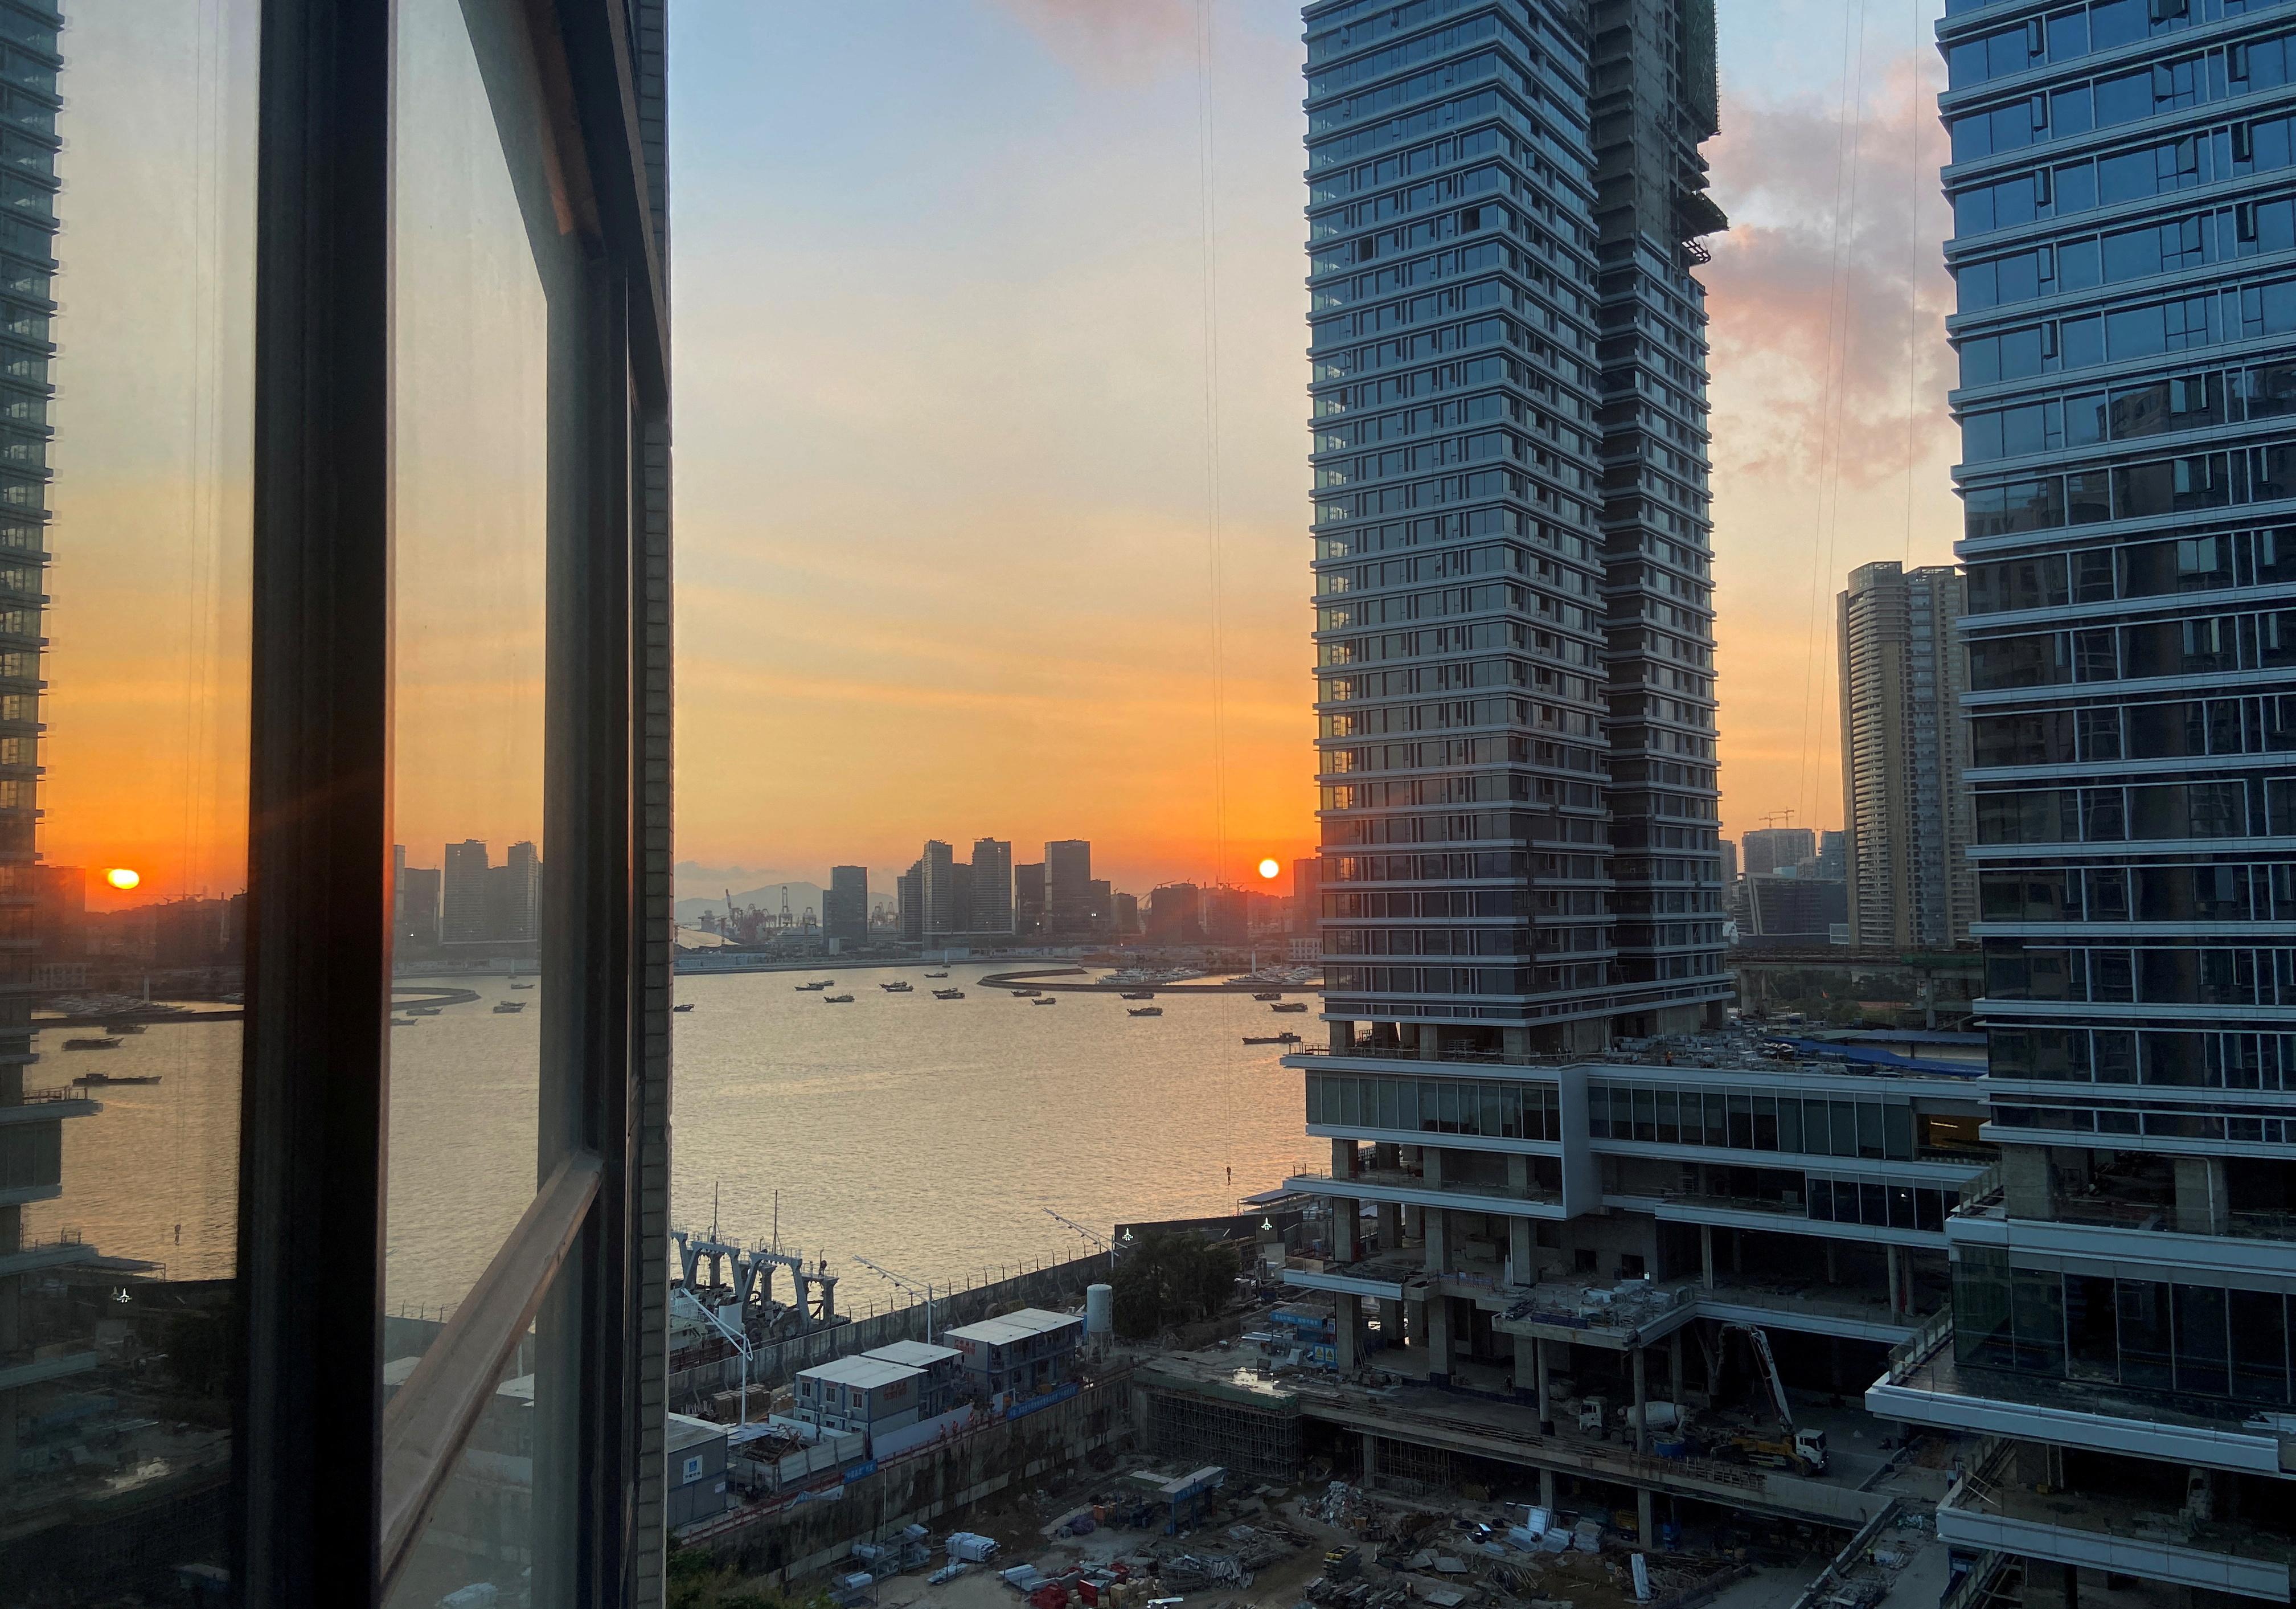 Under-construction apartments are pictured from a building during sunset in the Shekou area of Shenzhen, Guangdong